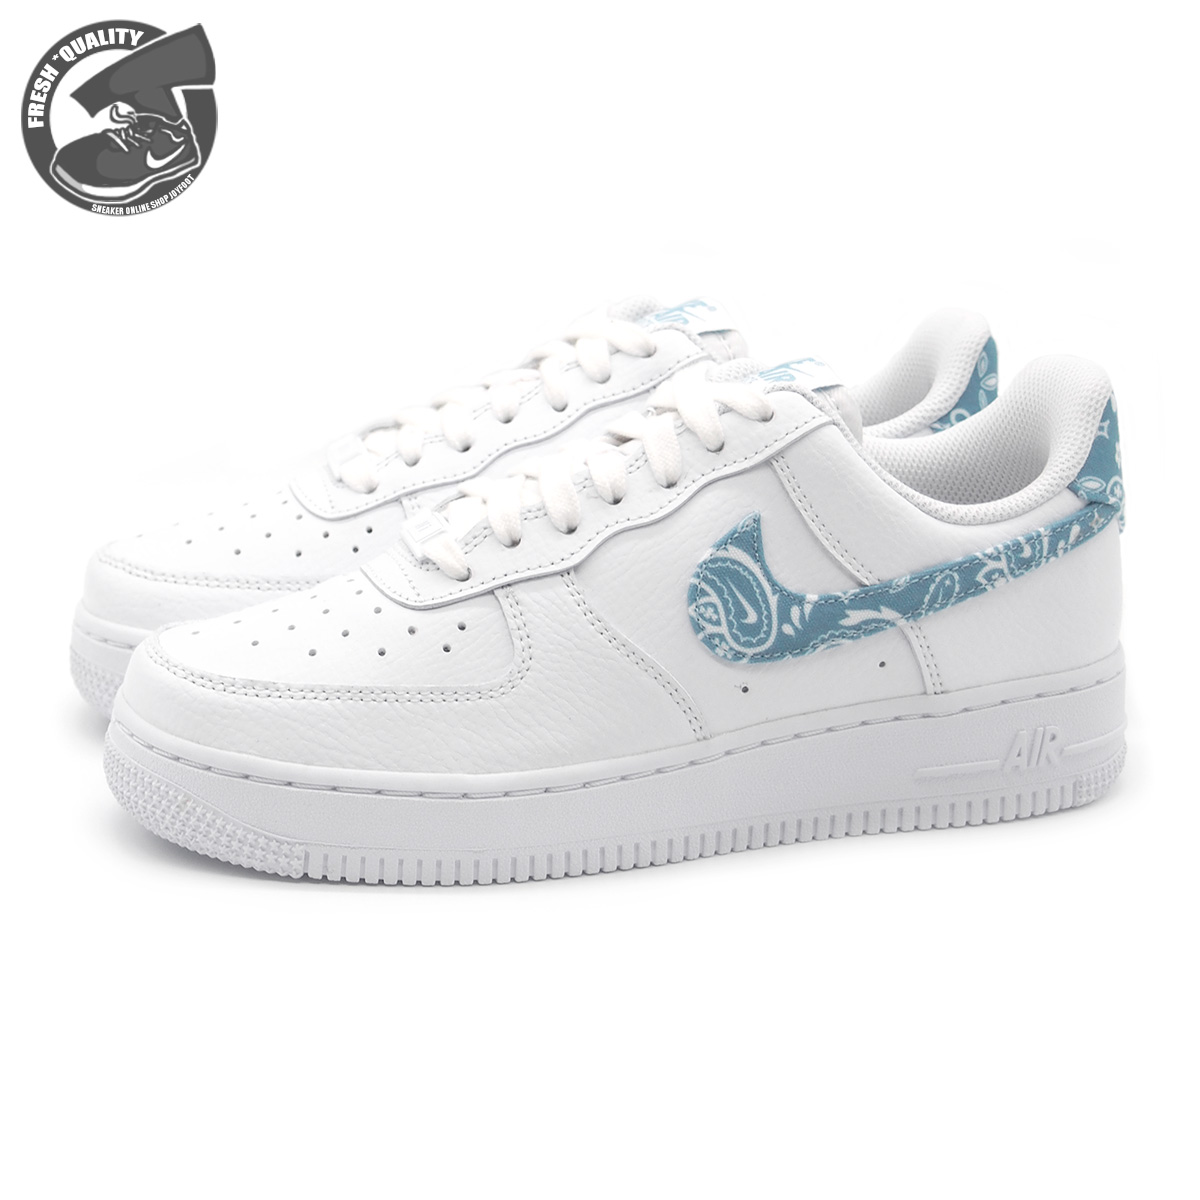 NIKE WMNS AIR FORCE 1 LOW '07 ESSENTIAL "PAISLEY BLUE" DH4406-100 （ホワイト/ワーンブルー） エア フォース 1 レディーススニーカーの商品画像